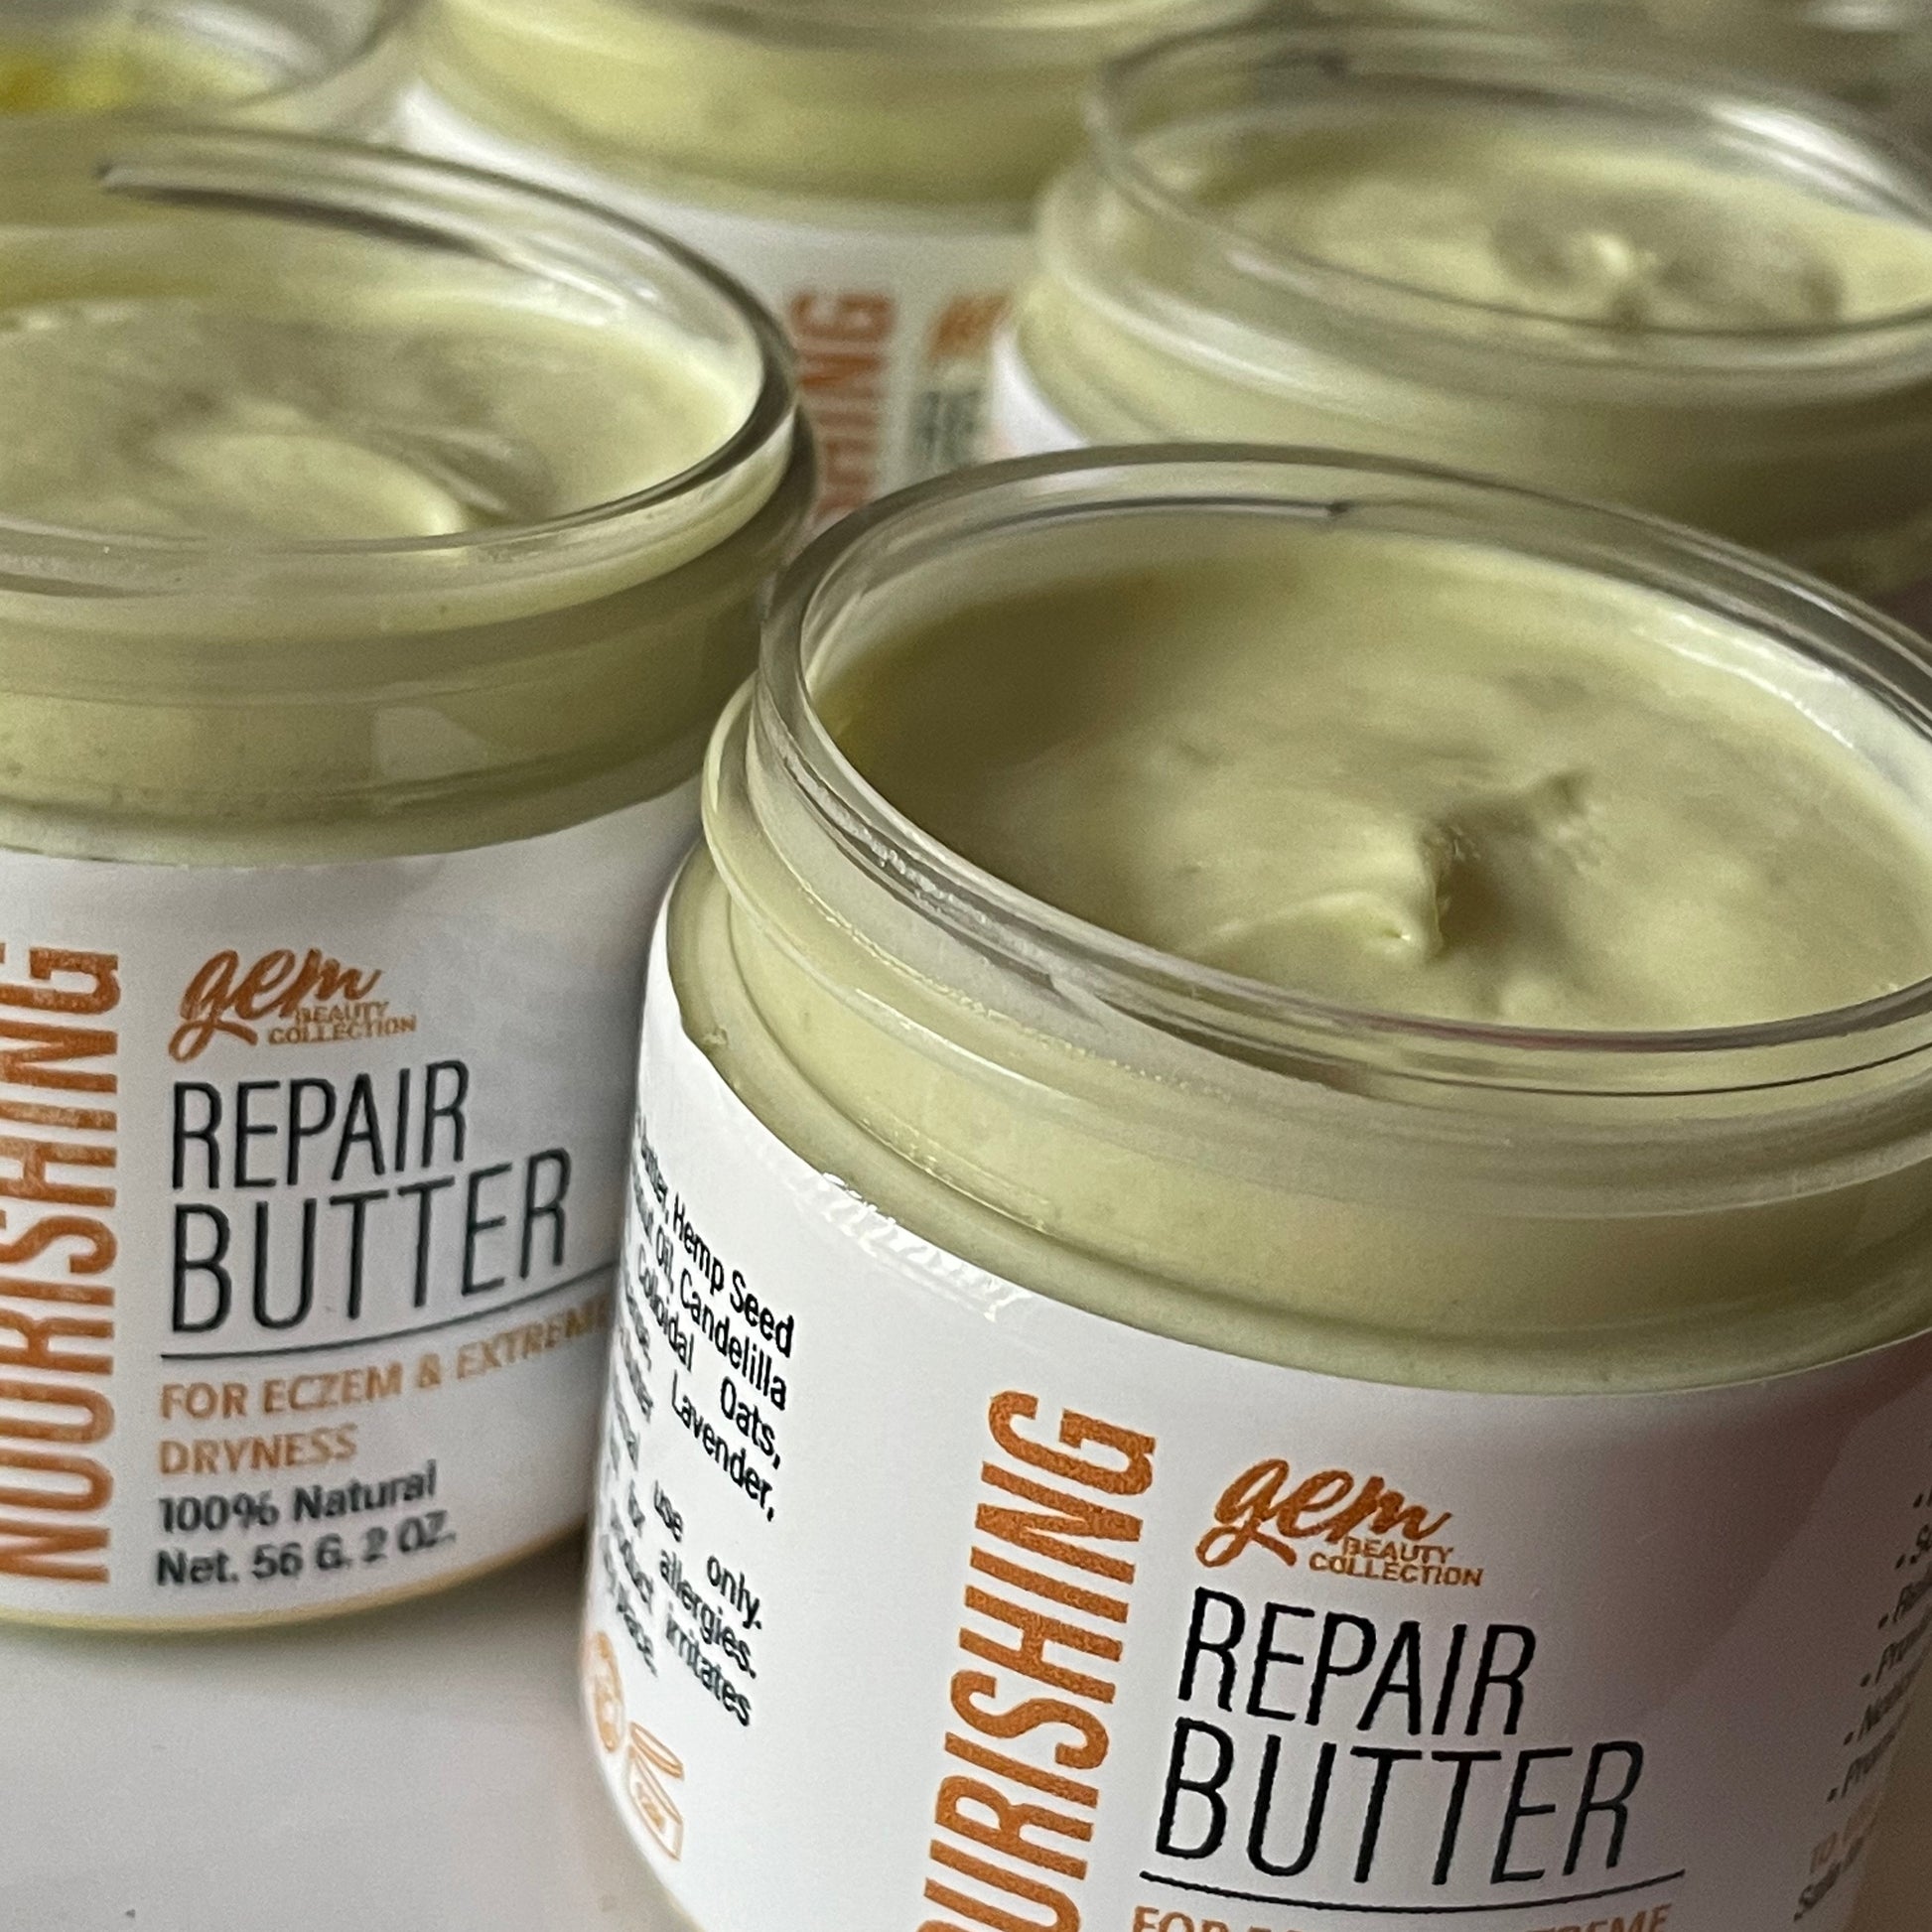 Nourishing Repair Butter - For Eczema & Extreme Dryness - Gem Beauty Collection